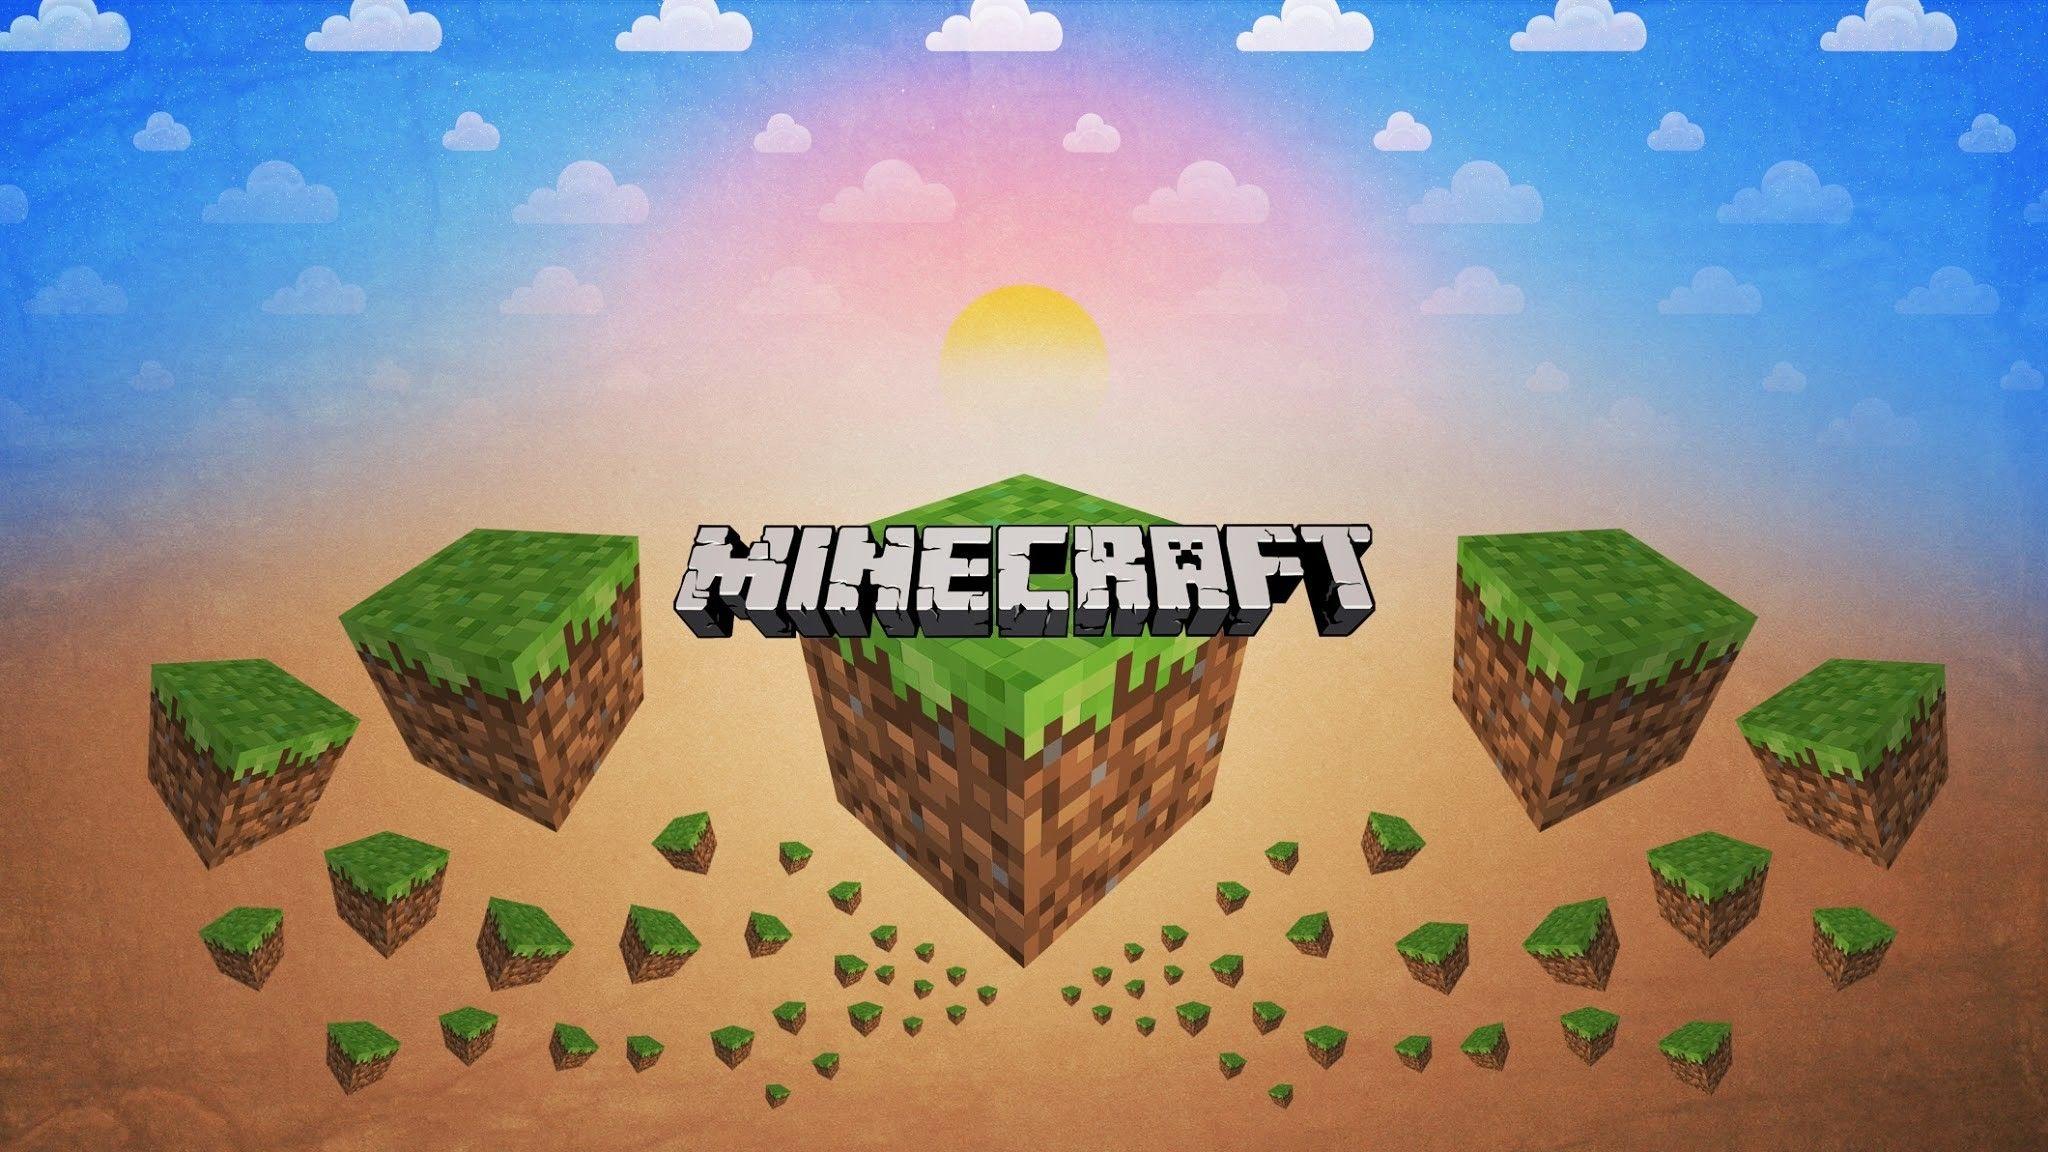 2048x1152 Minecraft Wallpapers Top Free 2048x1152 Minecraft Backgrounds Wallpaperaccess - 2048 x 1152 pixels and 6mb or less roblox